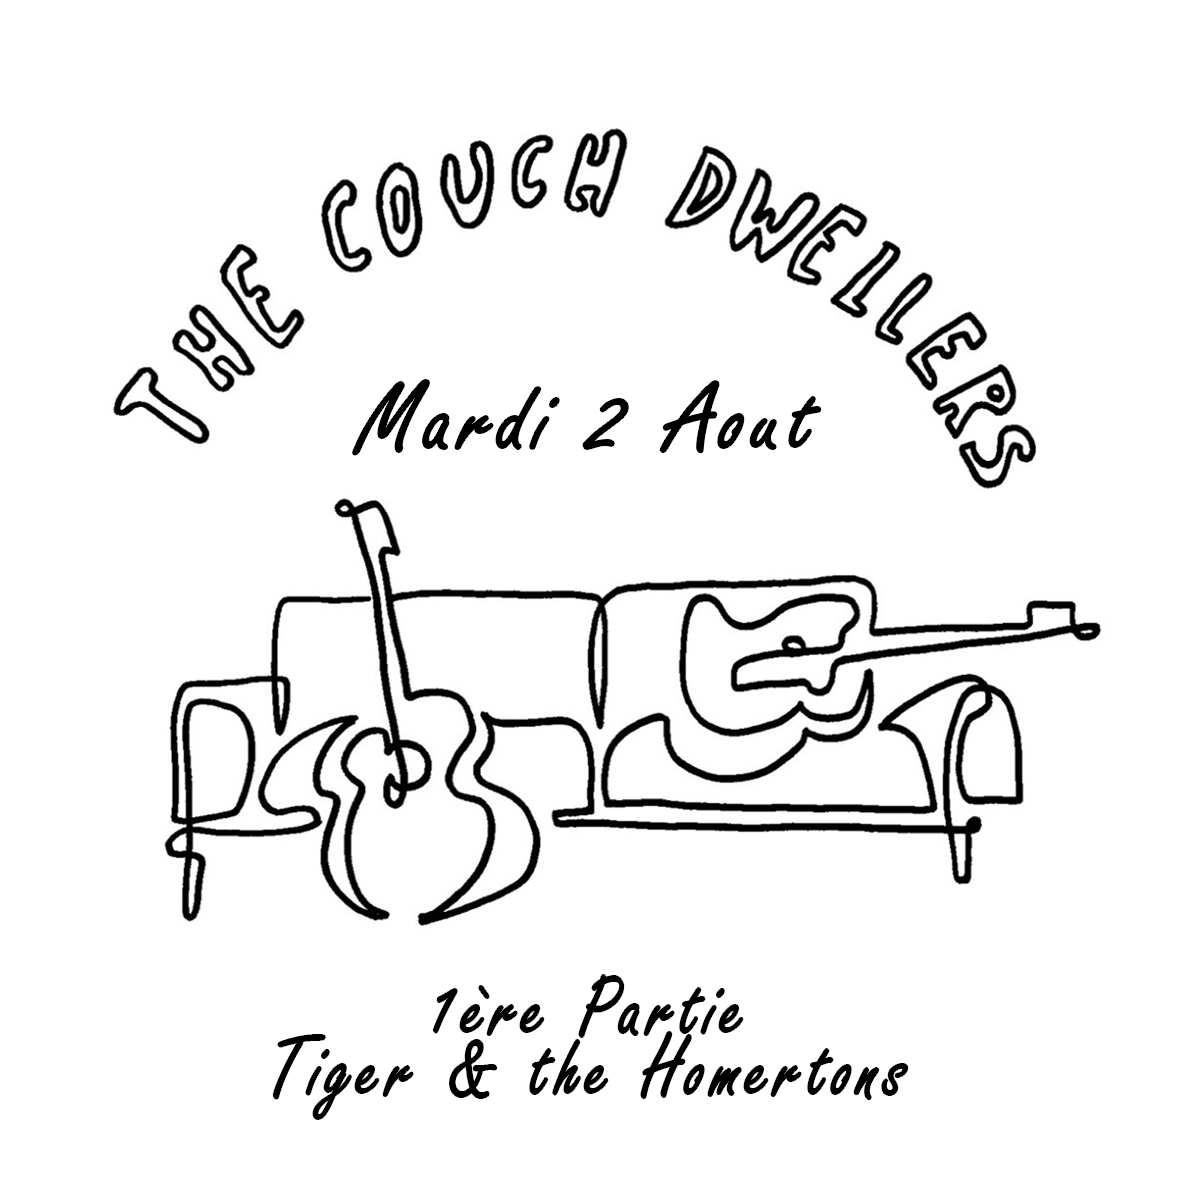 2 – Couch Dwellers